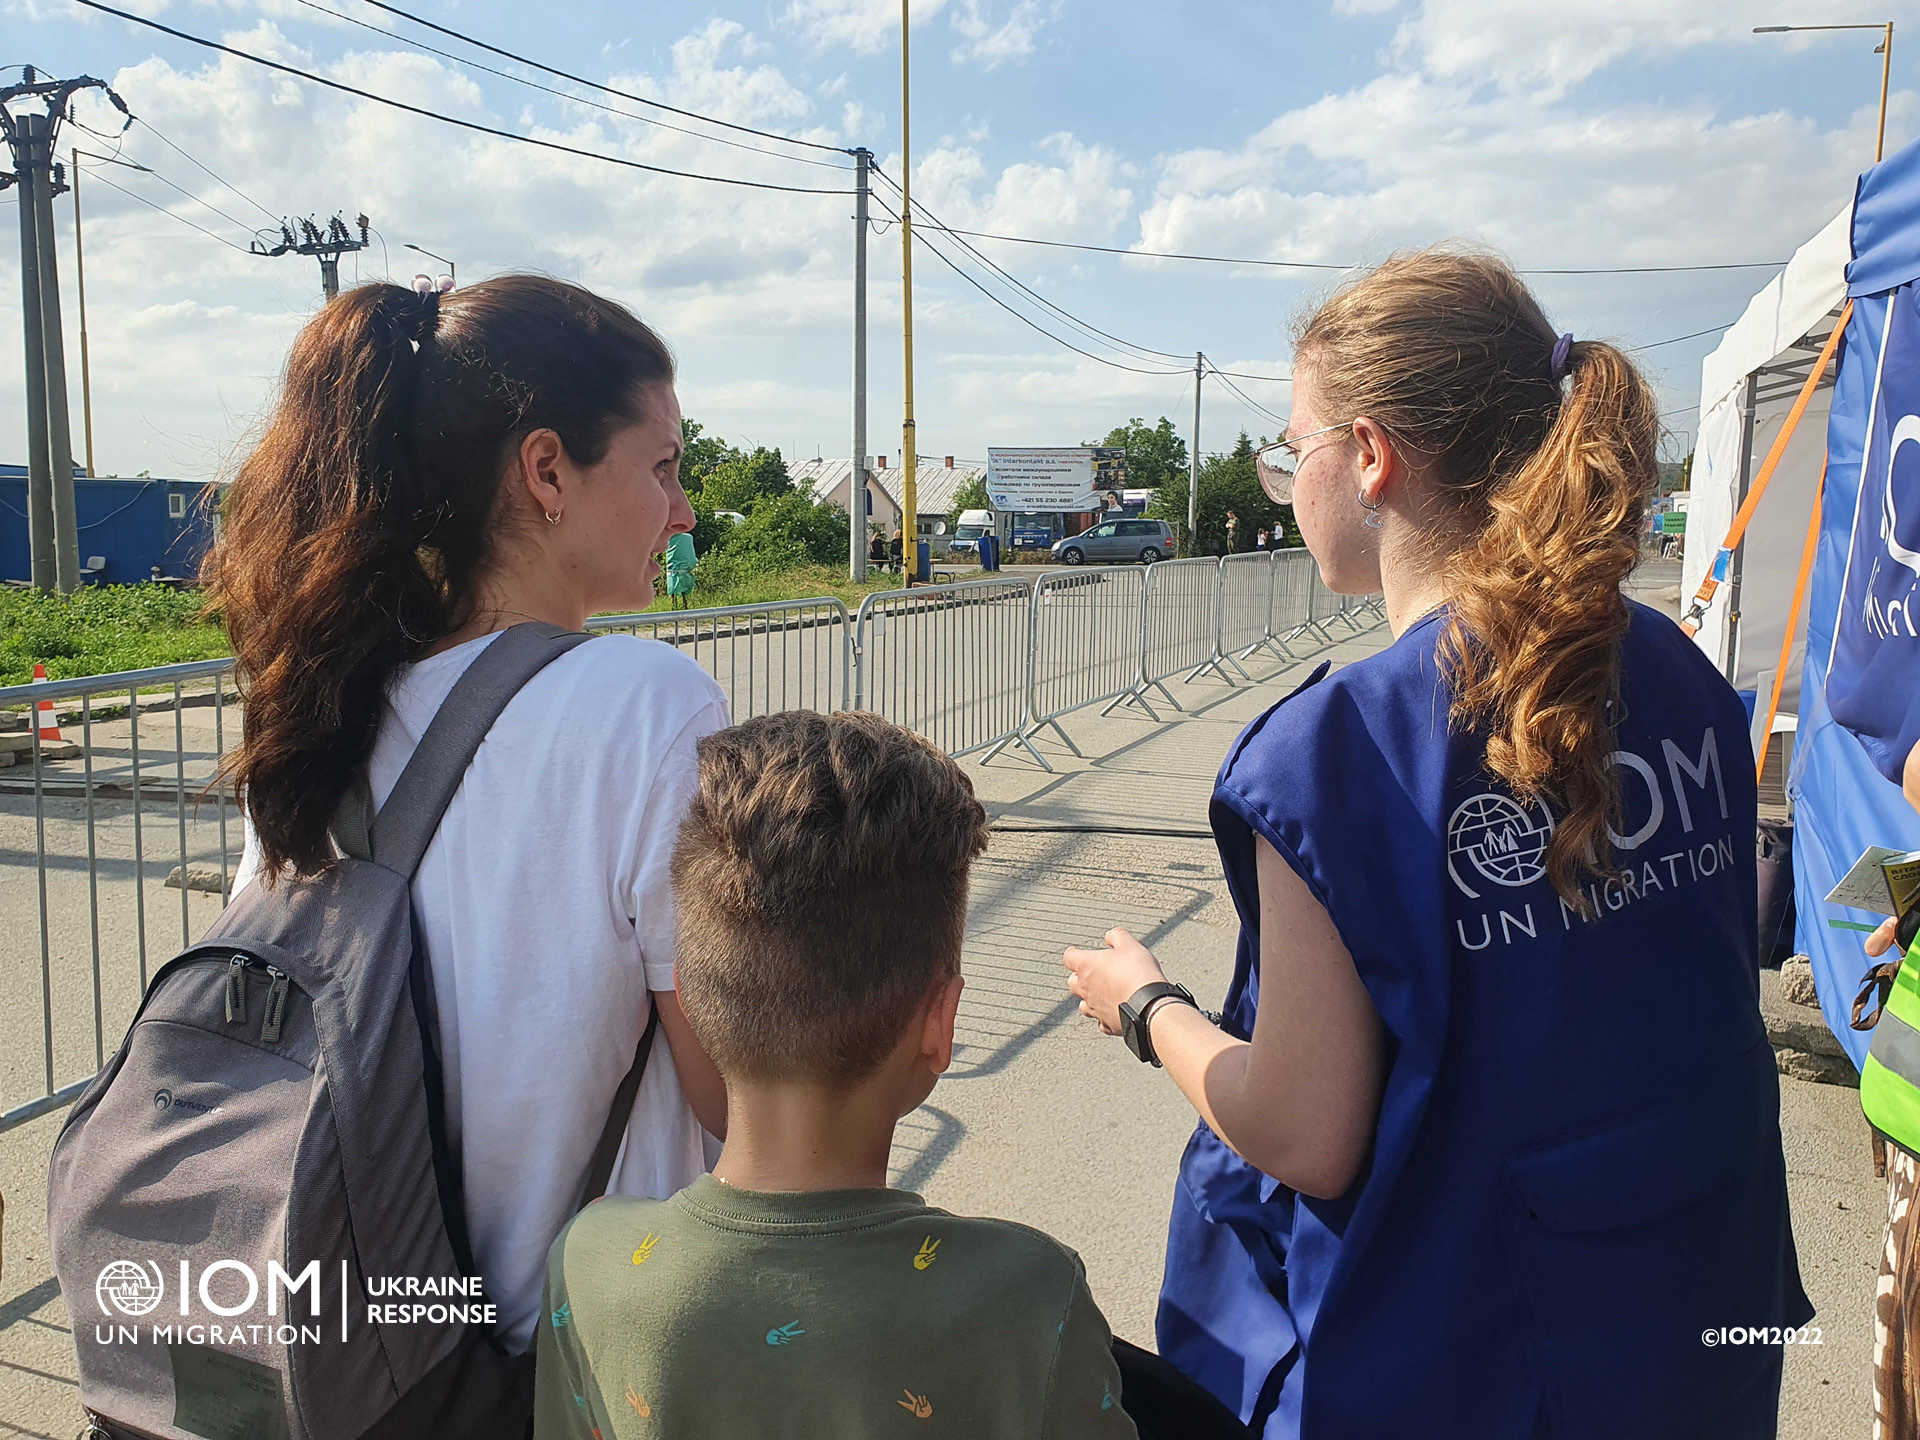 To better understand mobility dynamics and rapidly assess the immediate needs of affected populations fleeing war in Ukraine, IOM continues to conduct face-to-face surveys with Ukrainian refugees and third-country nationals. Photo © International Organization for Migration (IOM) 2022.